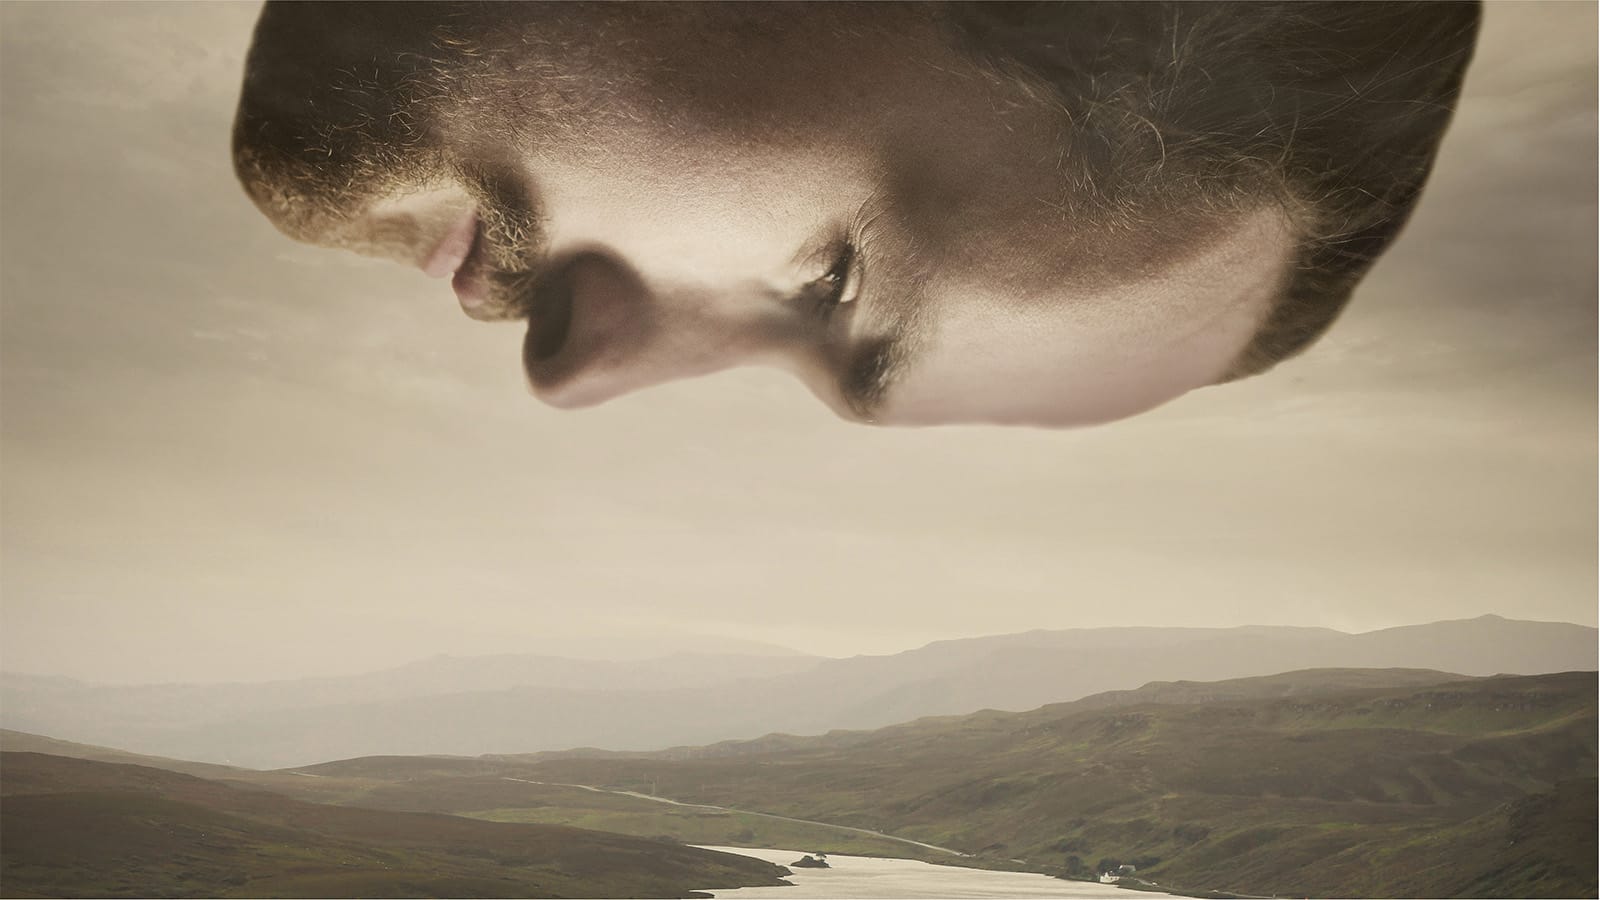 A man's head looking down on a hilly landscape